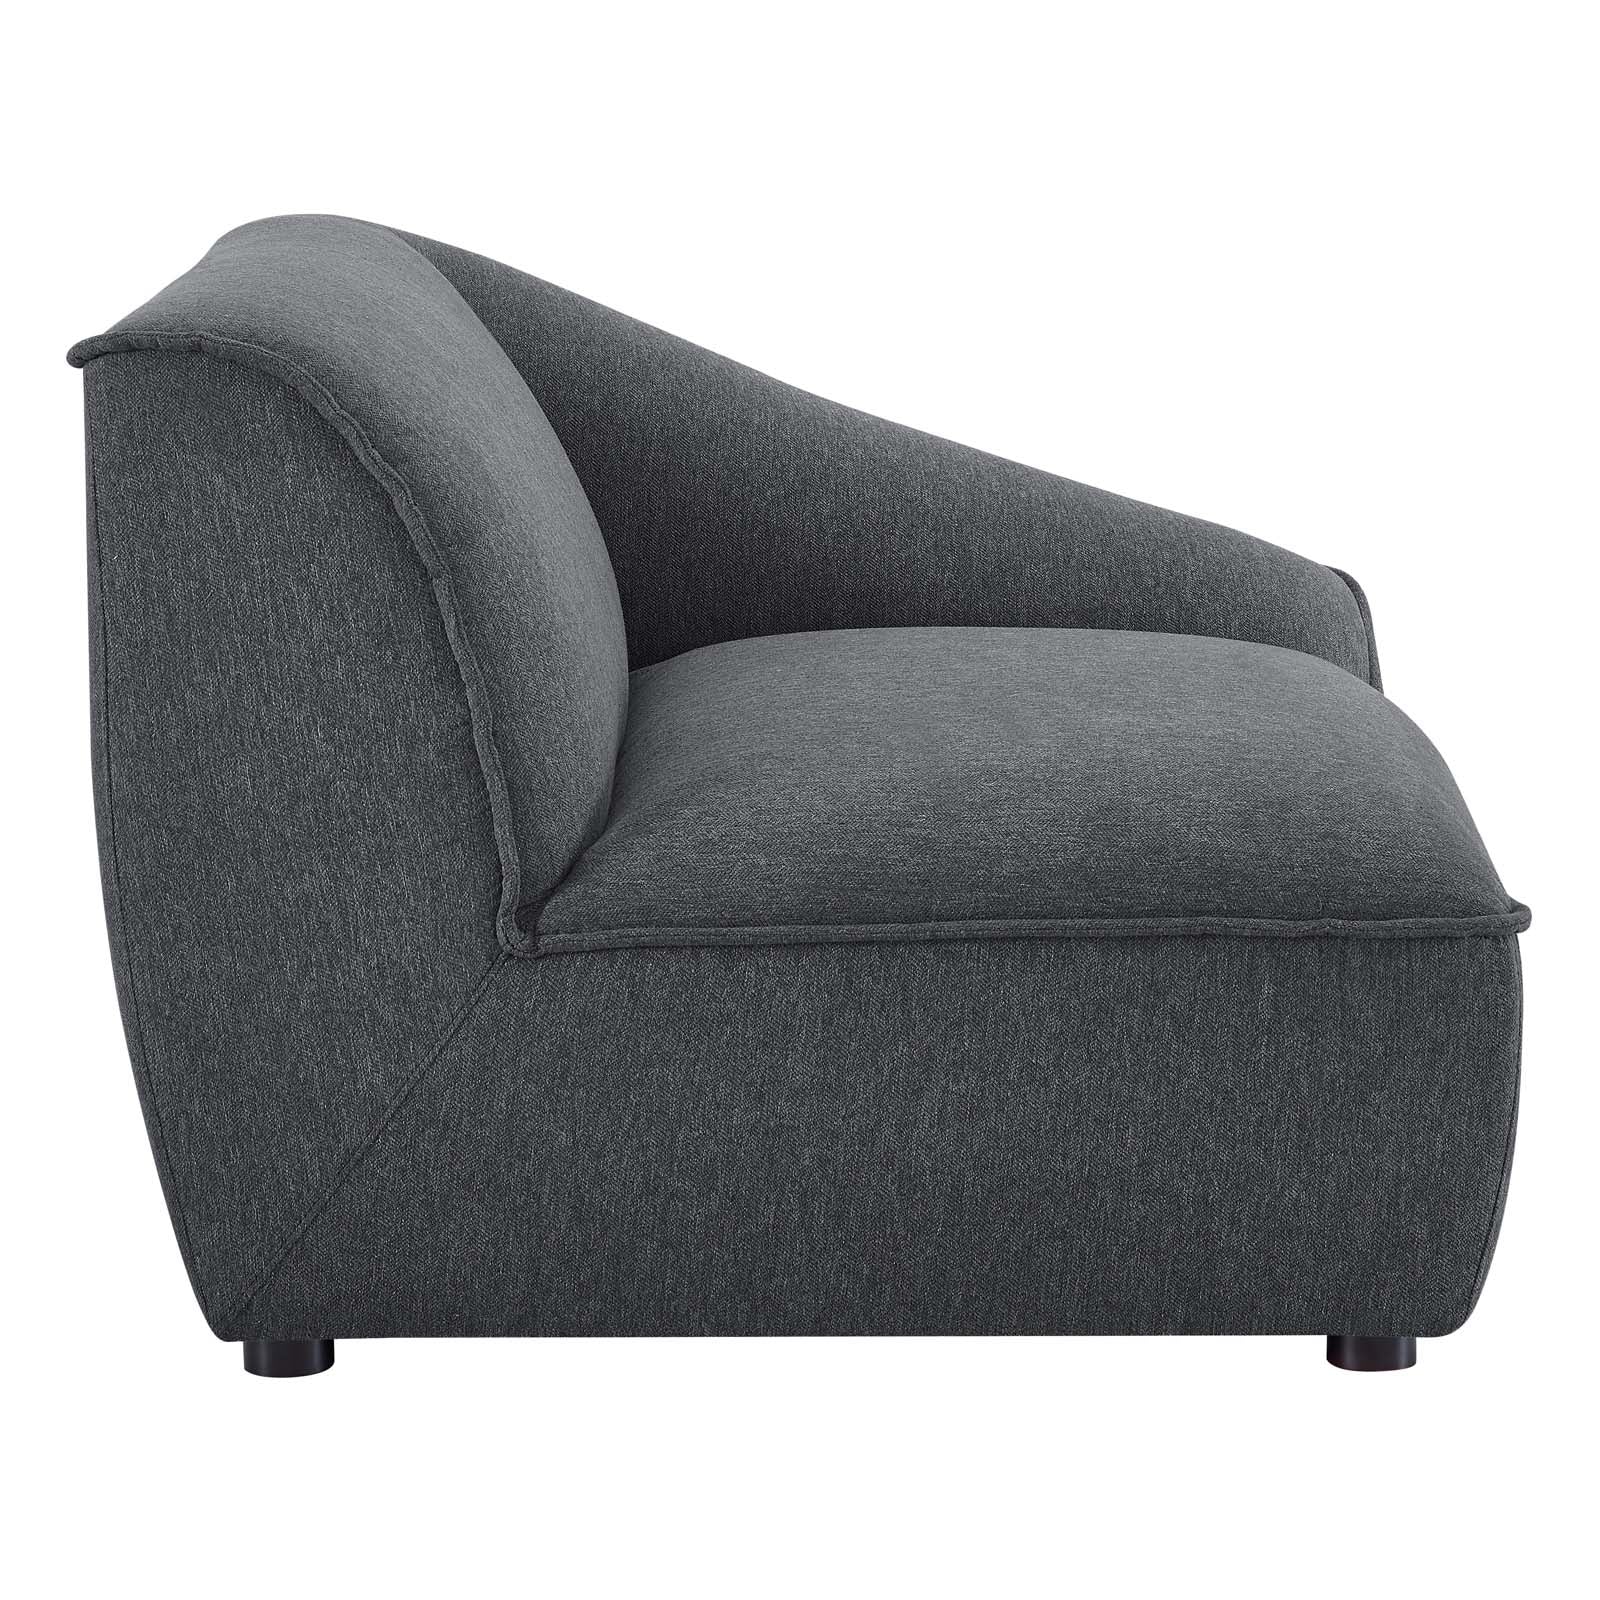 Comprise Left-Arm Sectional Sofa Chair - East Shore Modern Home Furnishings